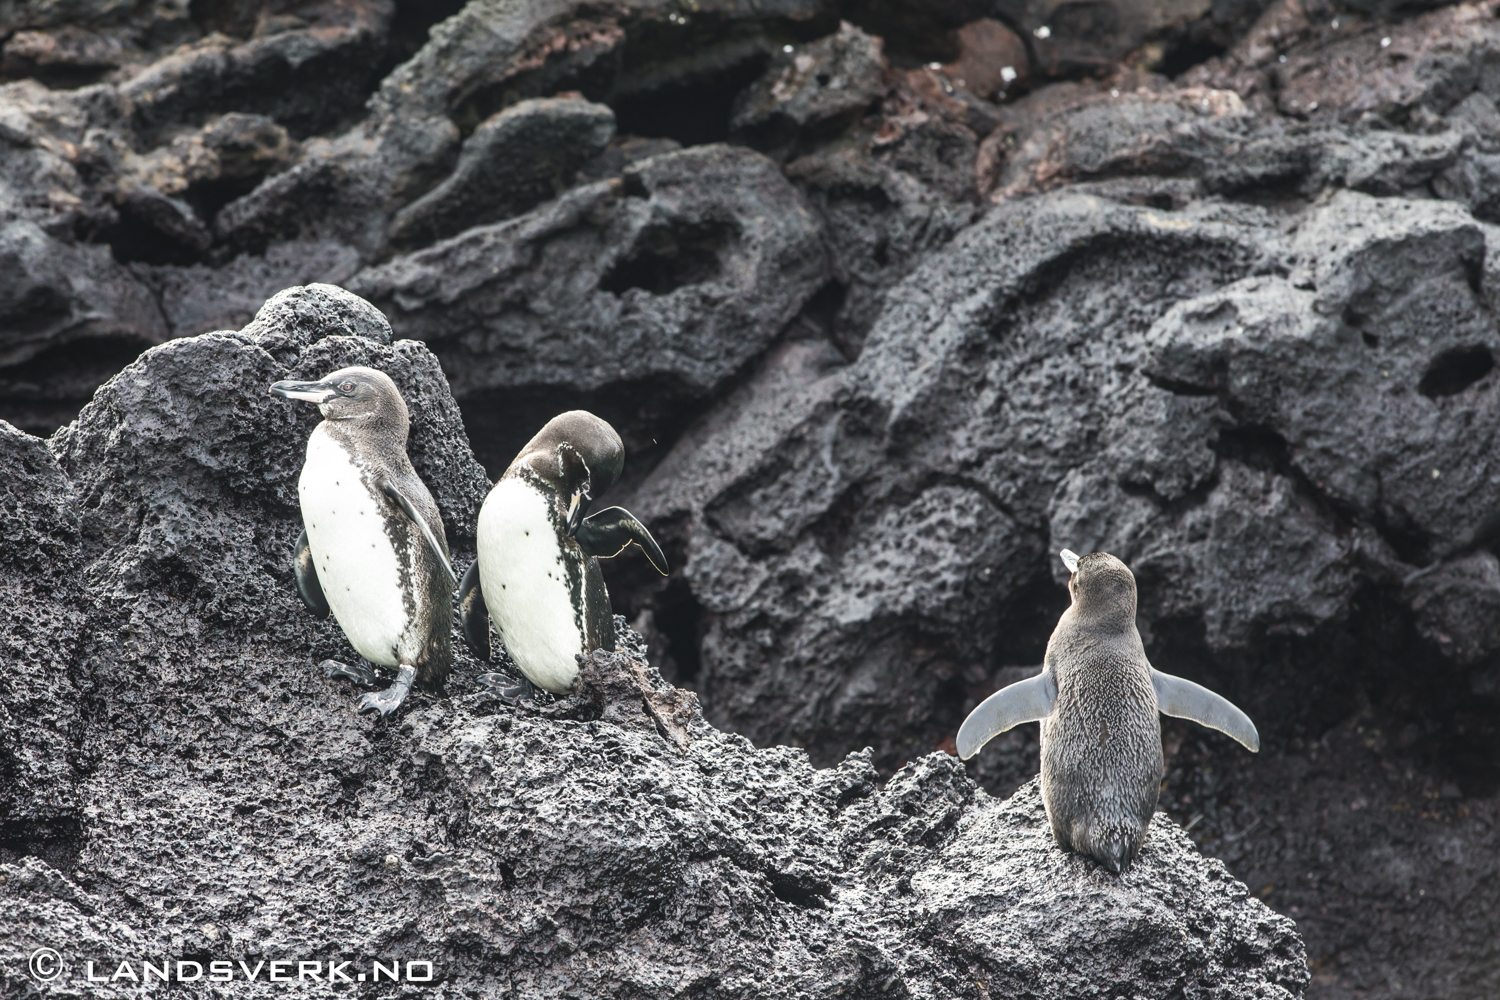 Wild Galapagos Penguins, Sombrero Chino, Galapagos. 

(Canon EOS 5D Mark III / Canon EF 70-200mm f/2.8 L IS II USM)